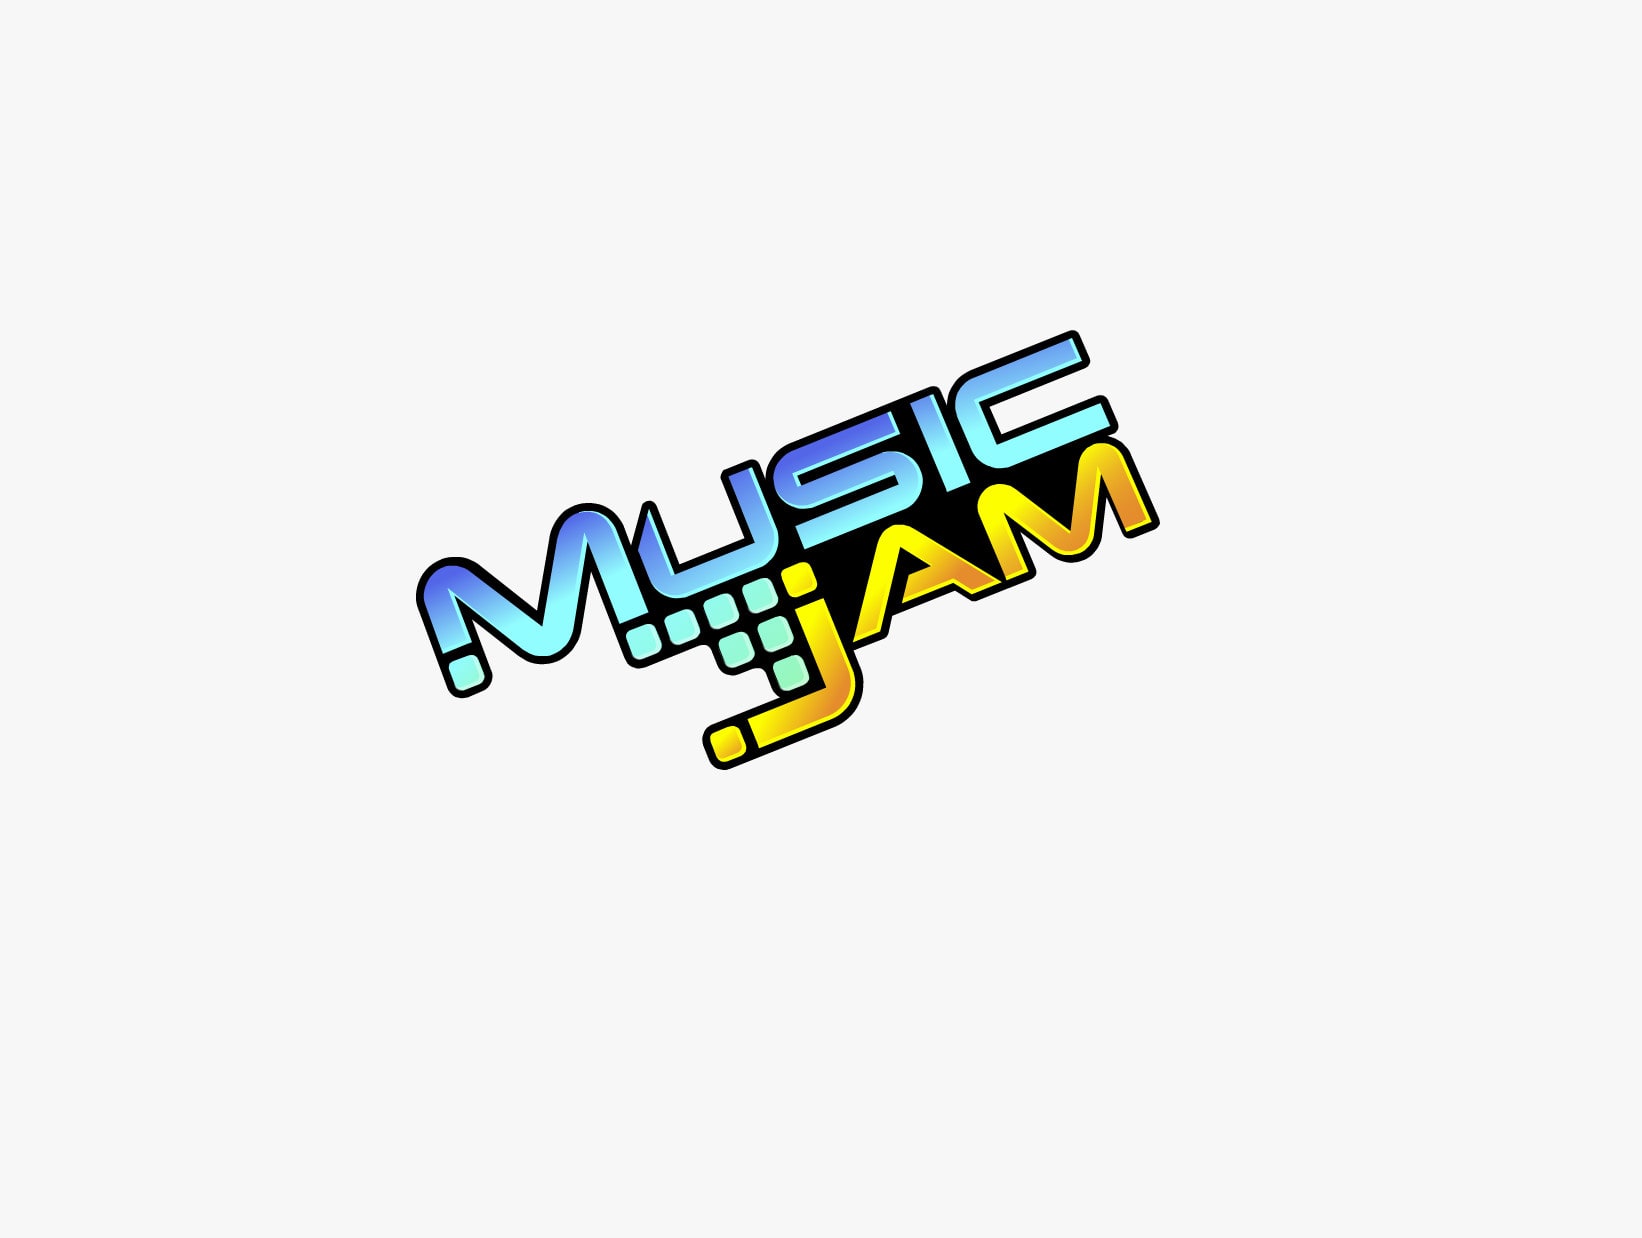 Design fantastic music club logo with express delivery by Mike_pride |  Fiverr